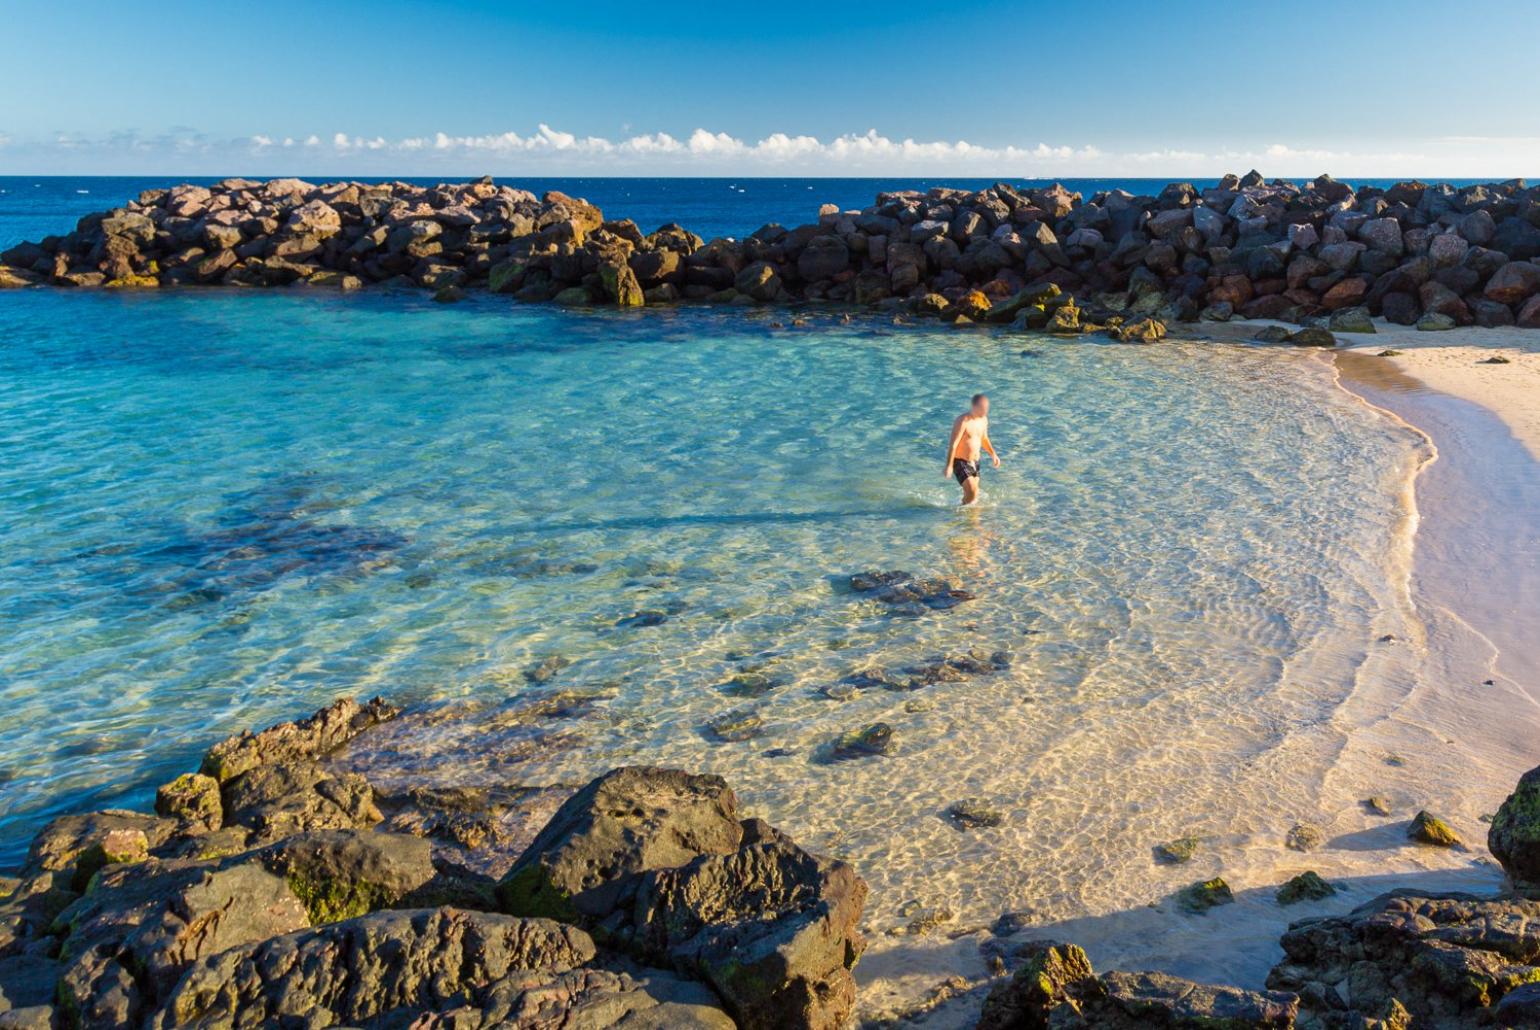 Soak in crystal clear waters at Costa Teguise